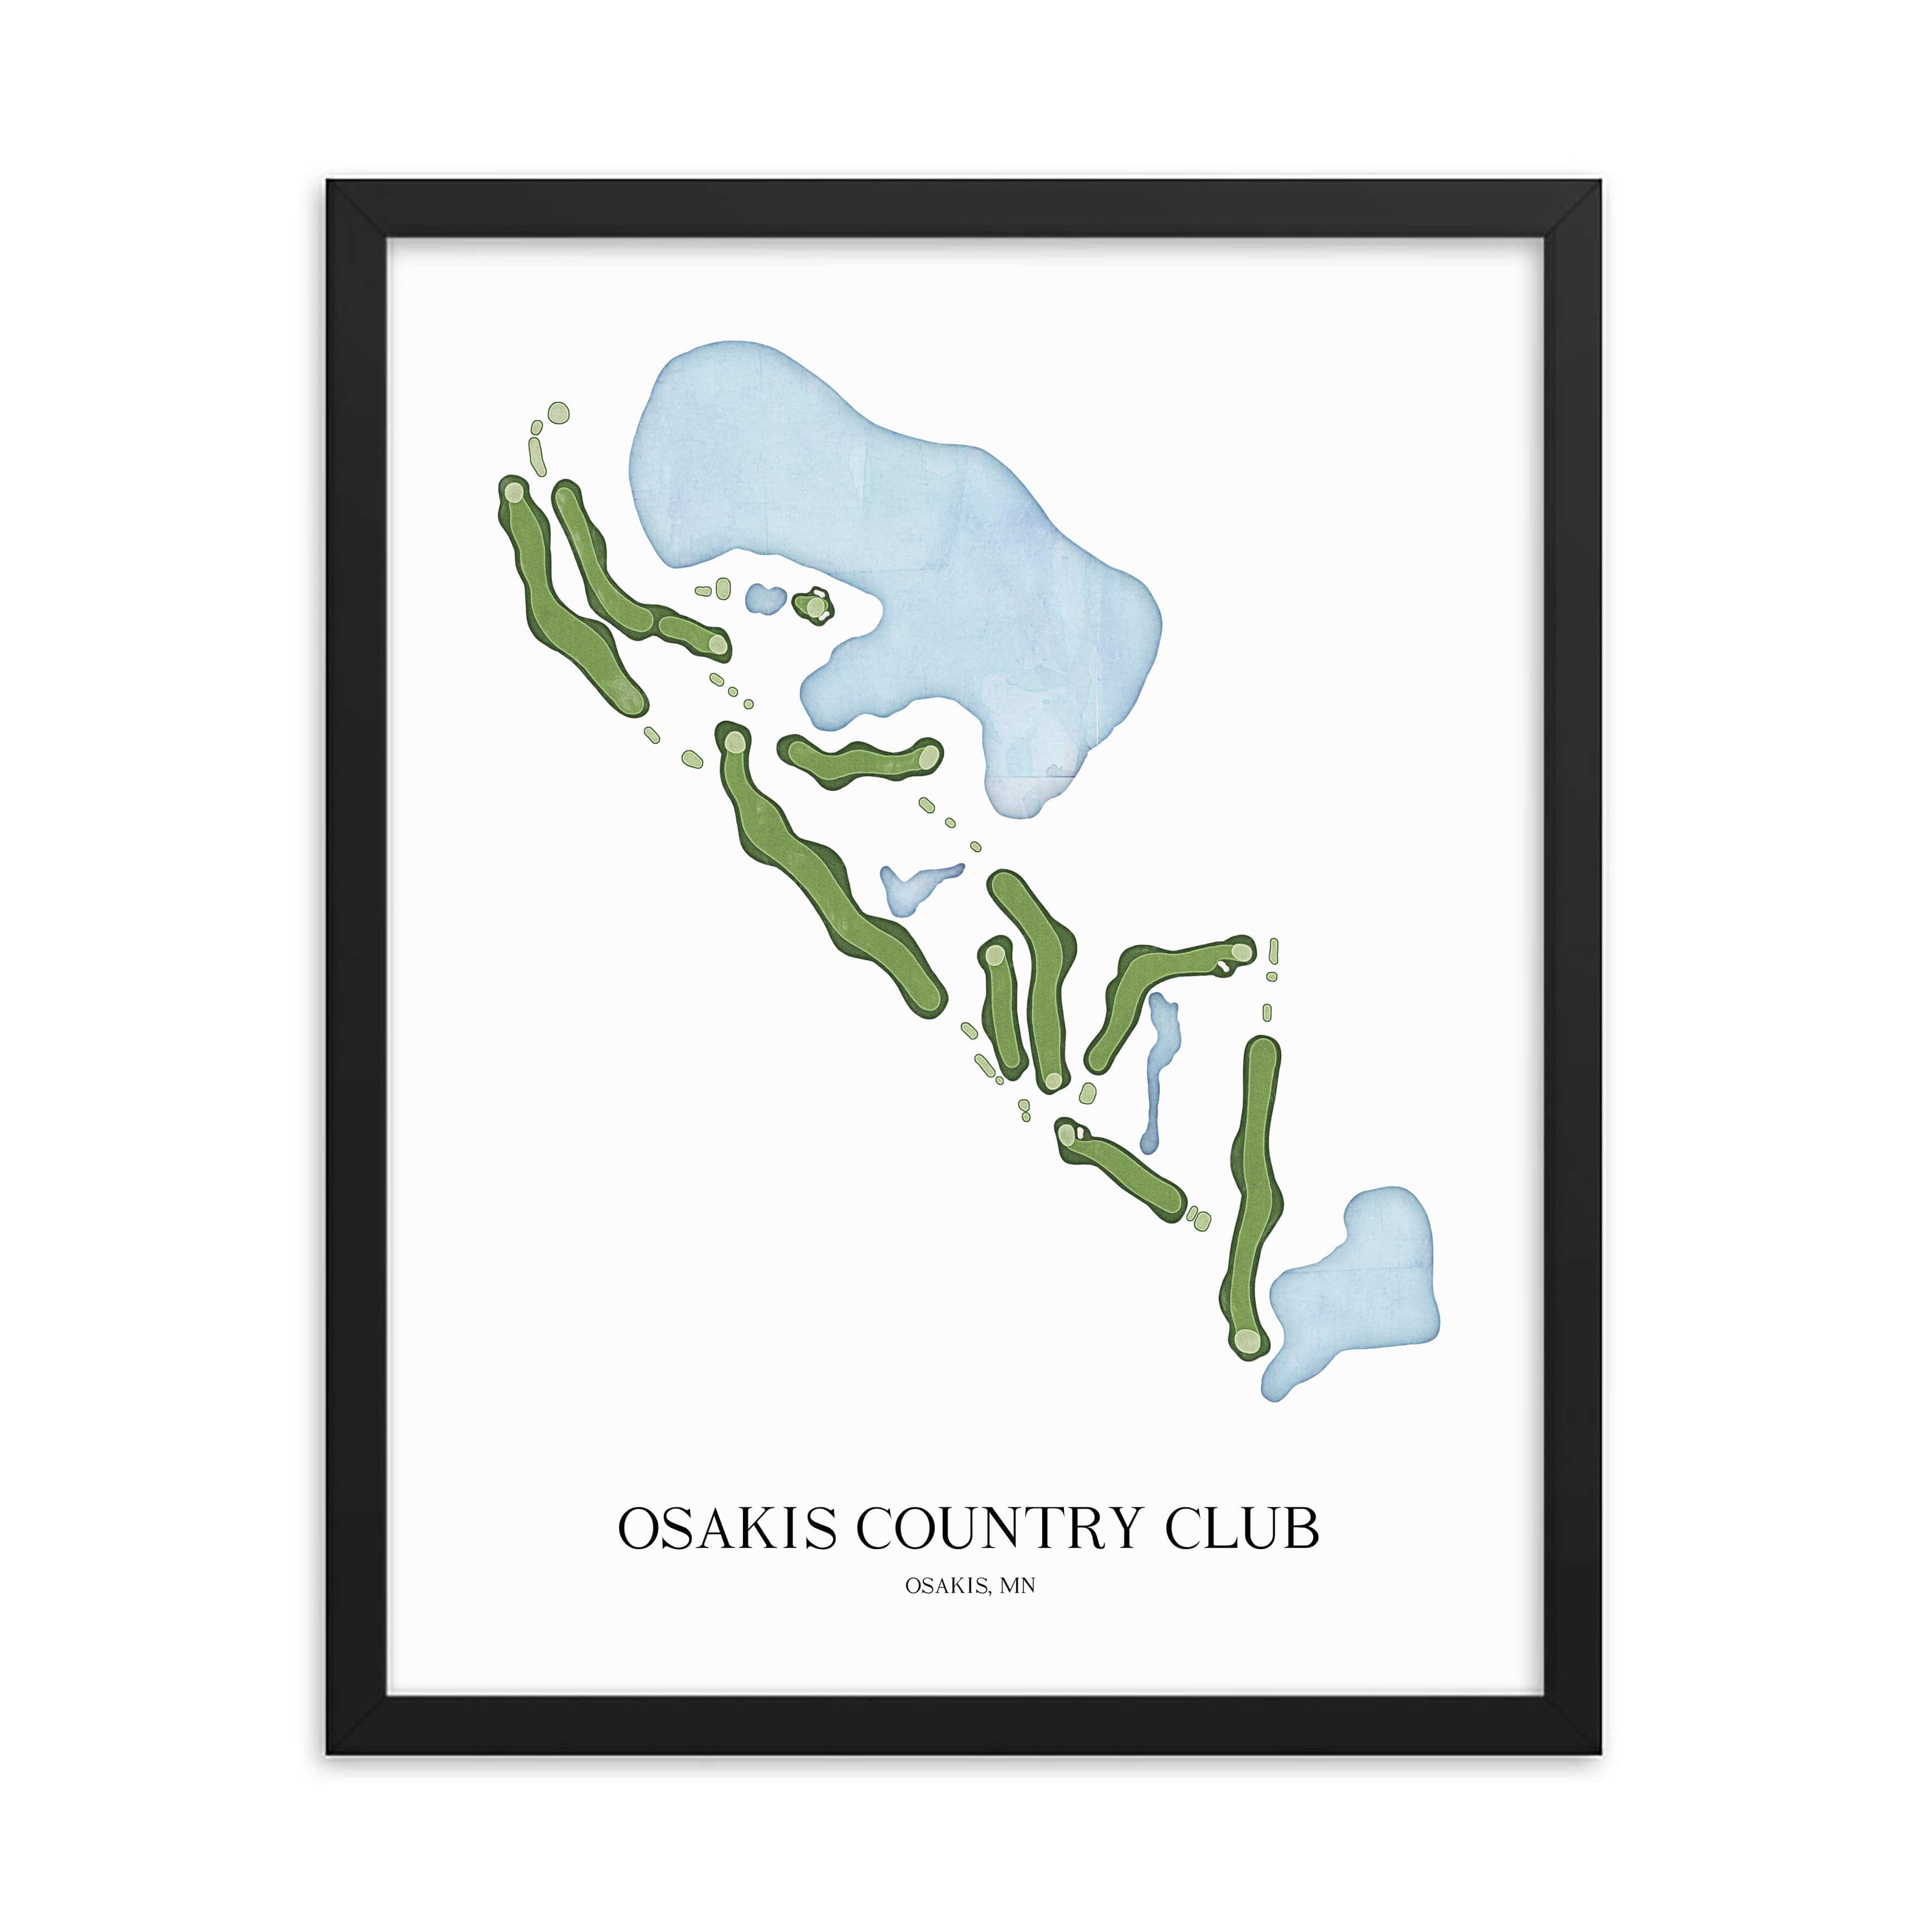 The 19th Hole Golf Shop - Golf Course Prints -  Osakis Country Club Golf Course Map